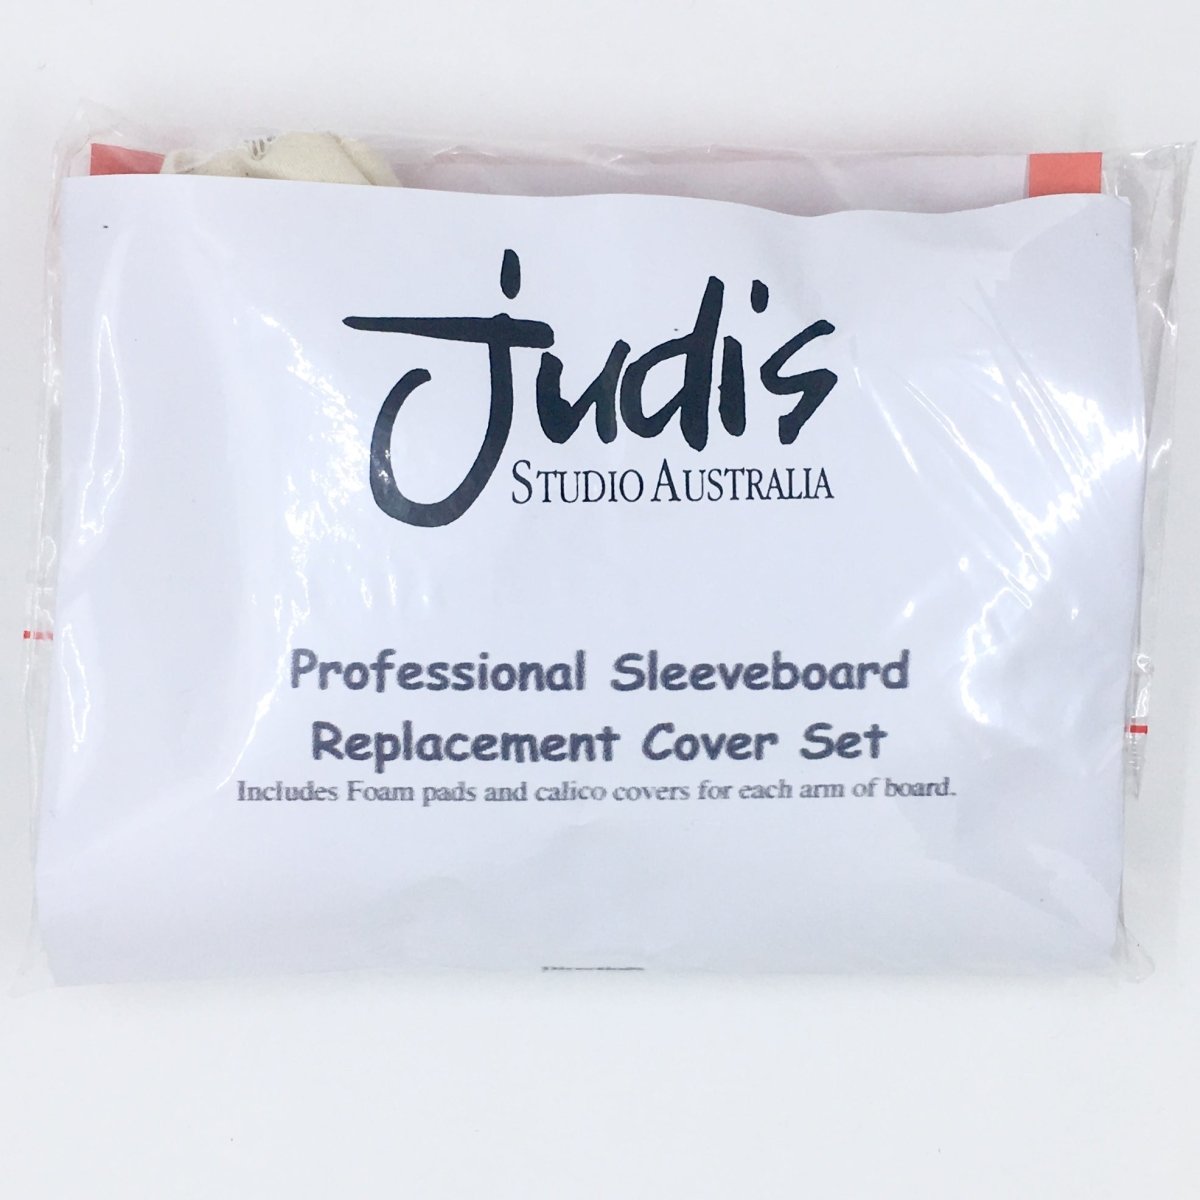 Judi's - Sleeve Board Replacement Cover Set